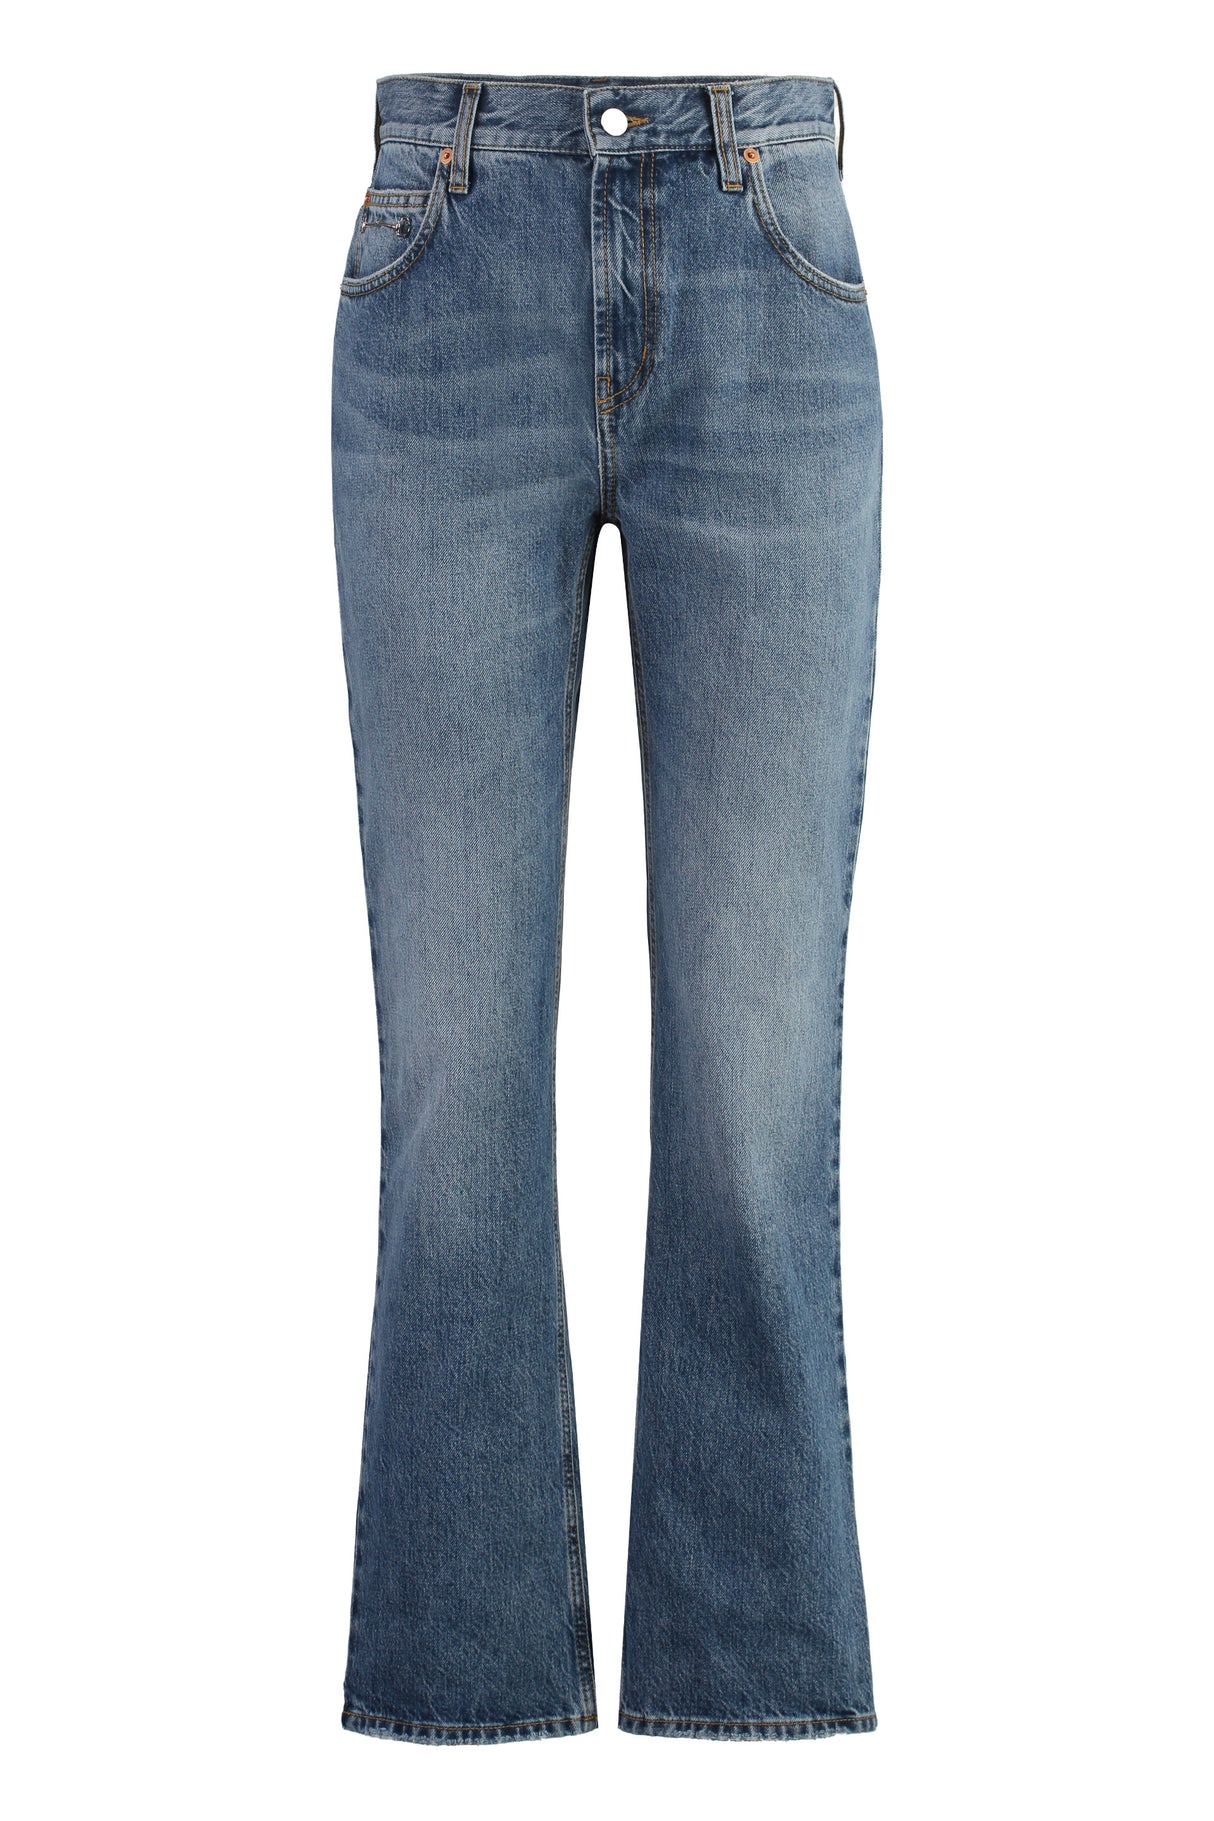 GUCCI Classic Blue 5-Pocket Slim Fit Jeans for Women